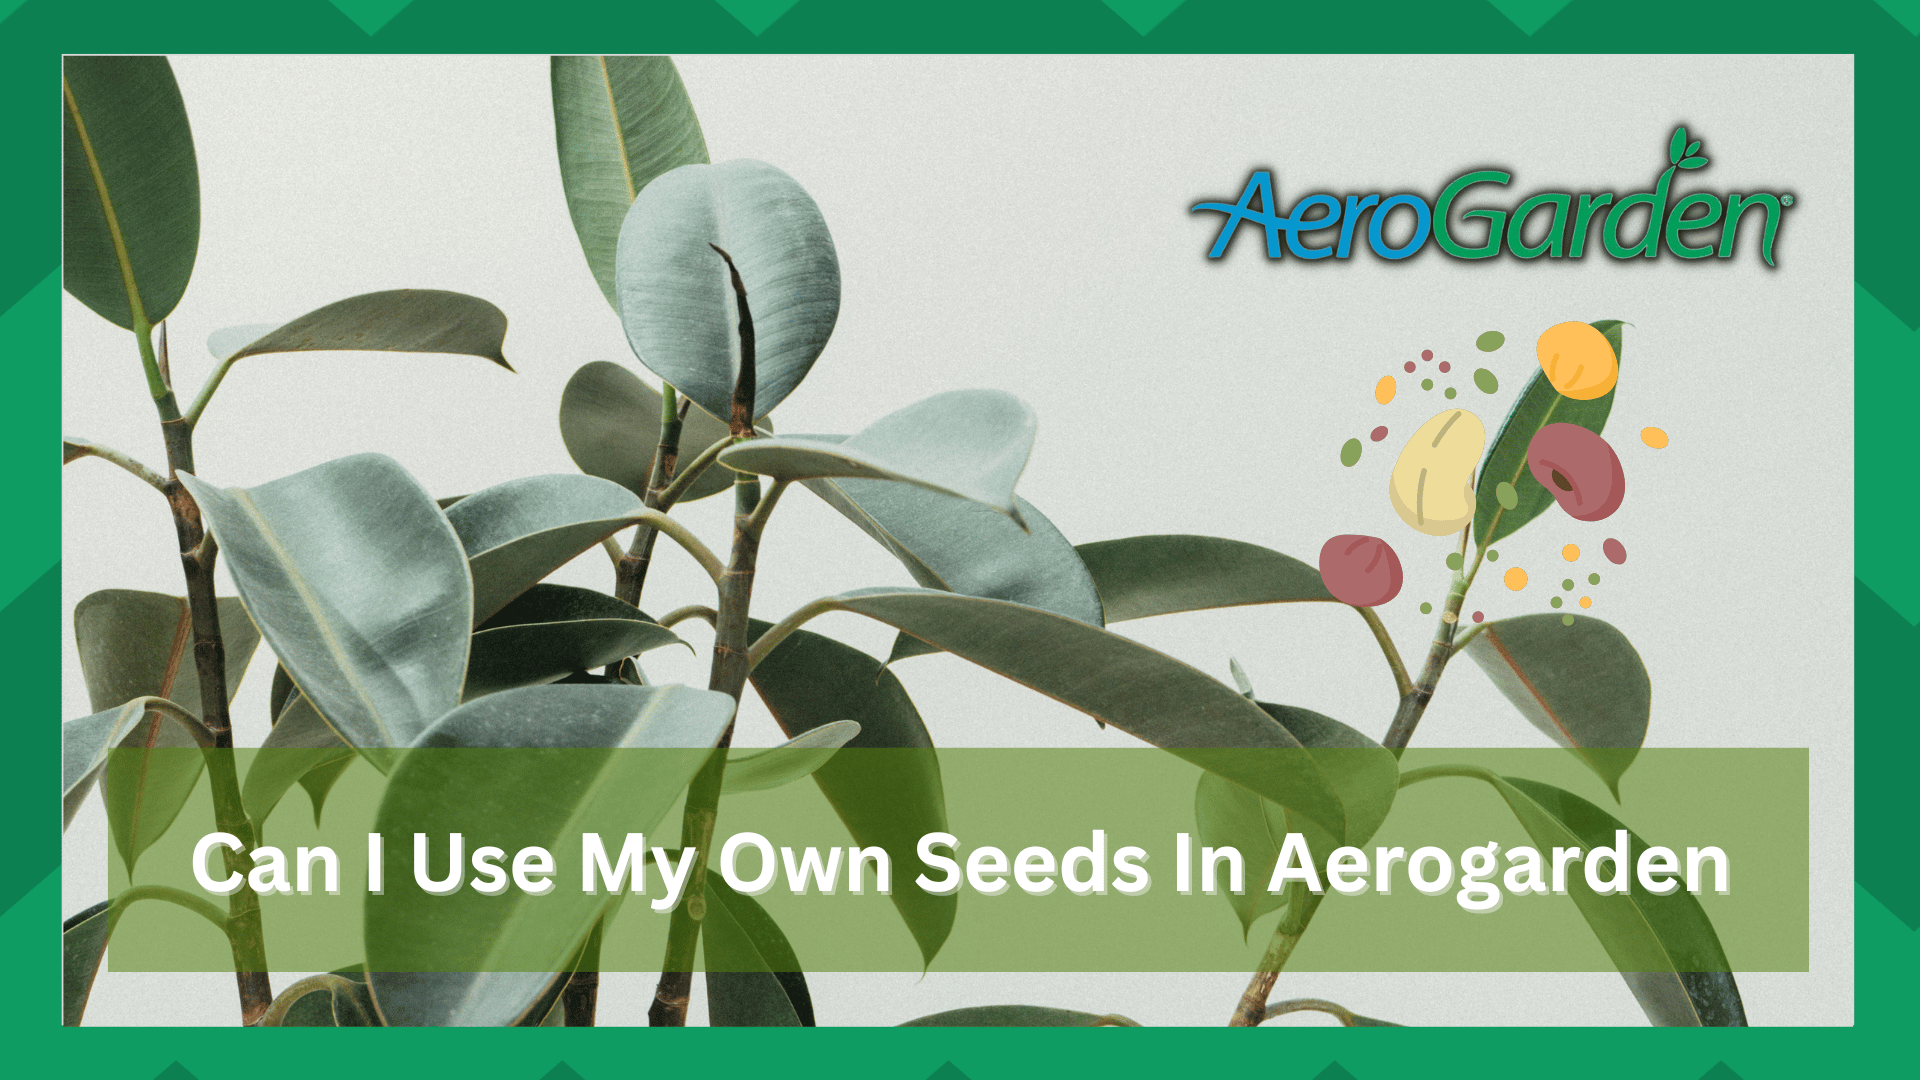 can i use my own seeds in an aerogarden